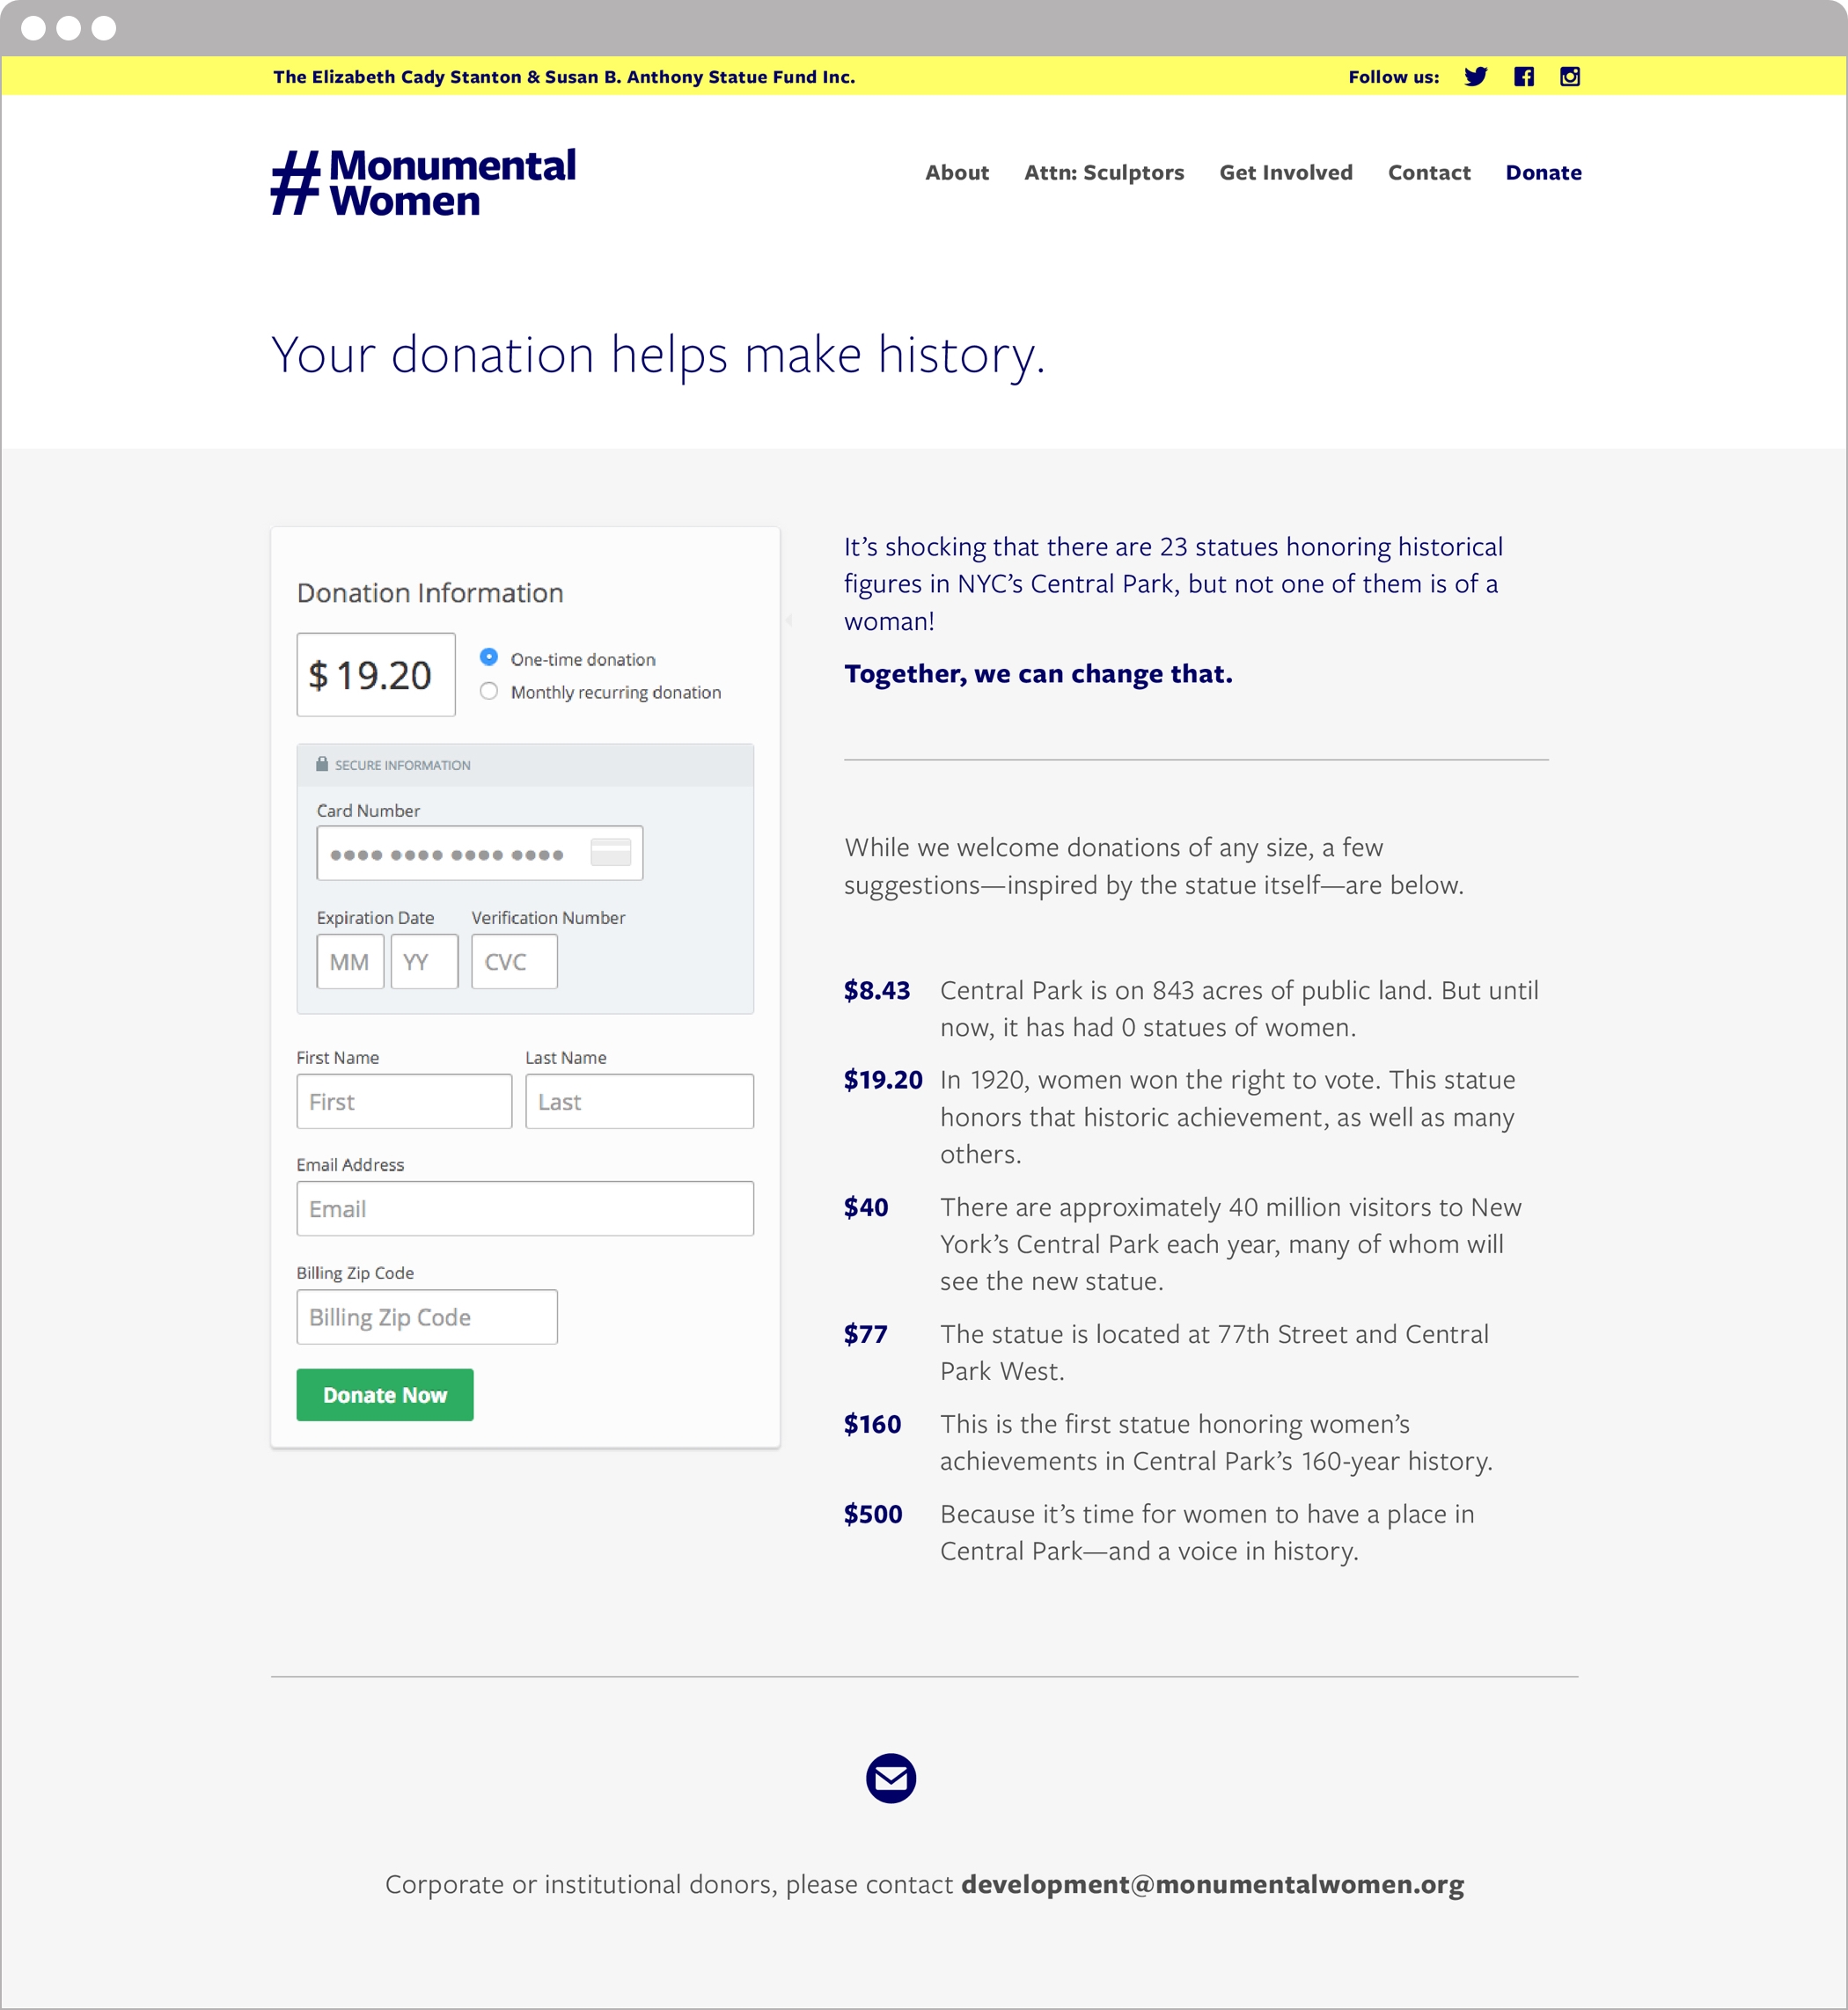 Design of donation page on the Monumental Women website.